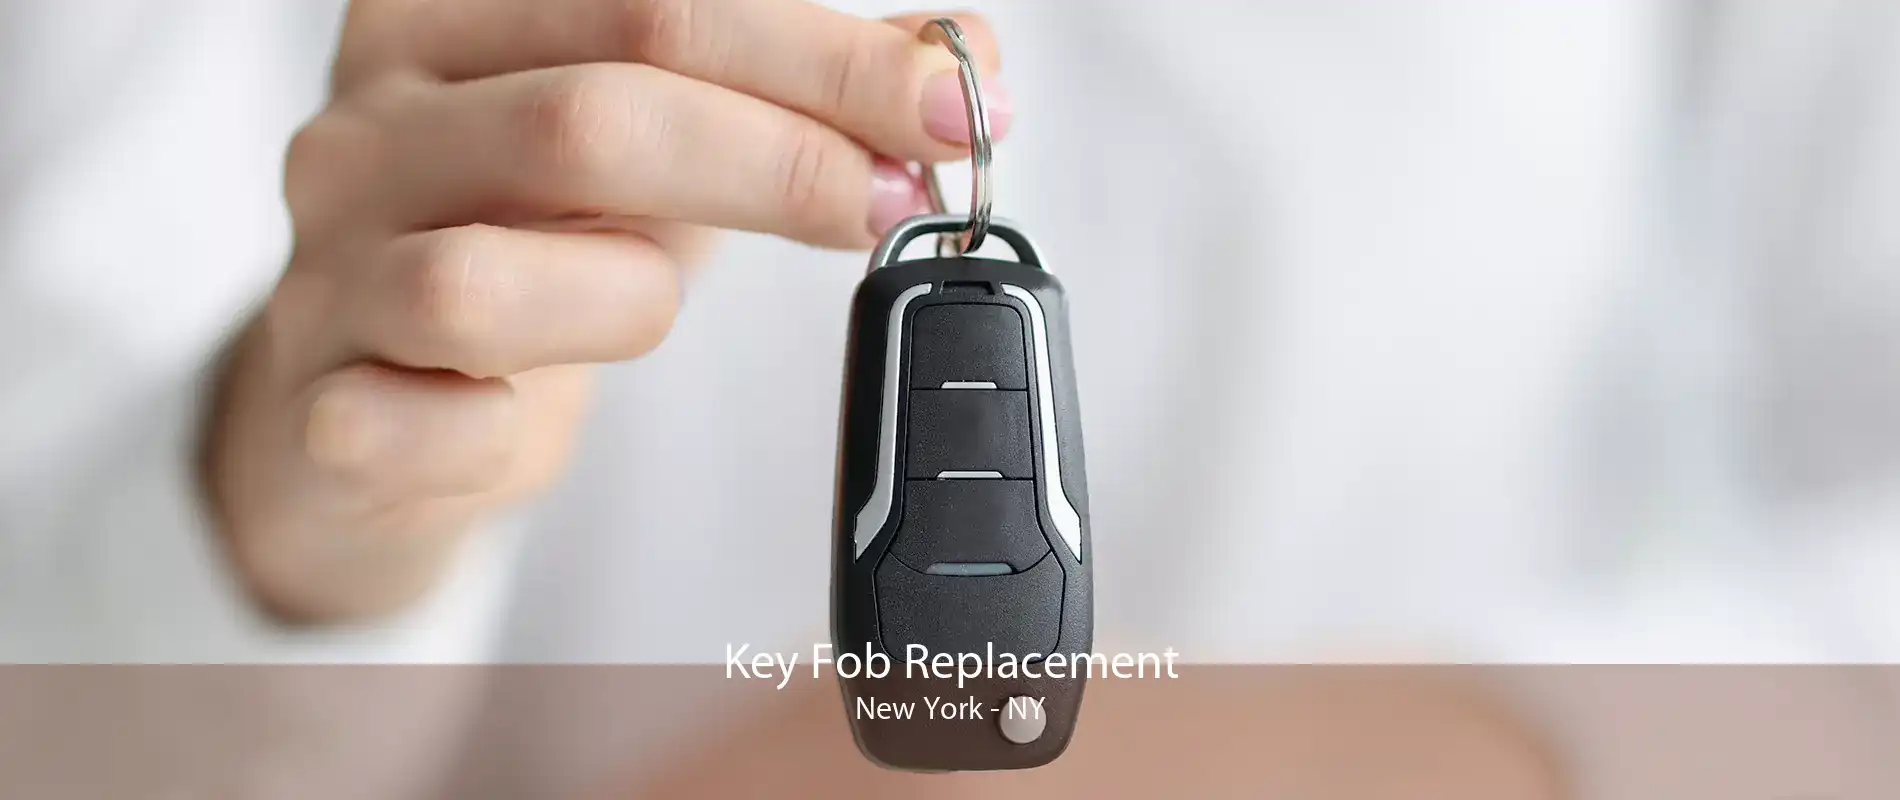 Key Fob Replacement New York - NY